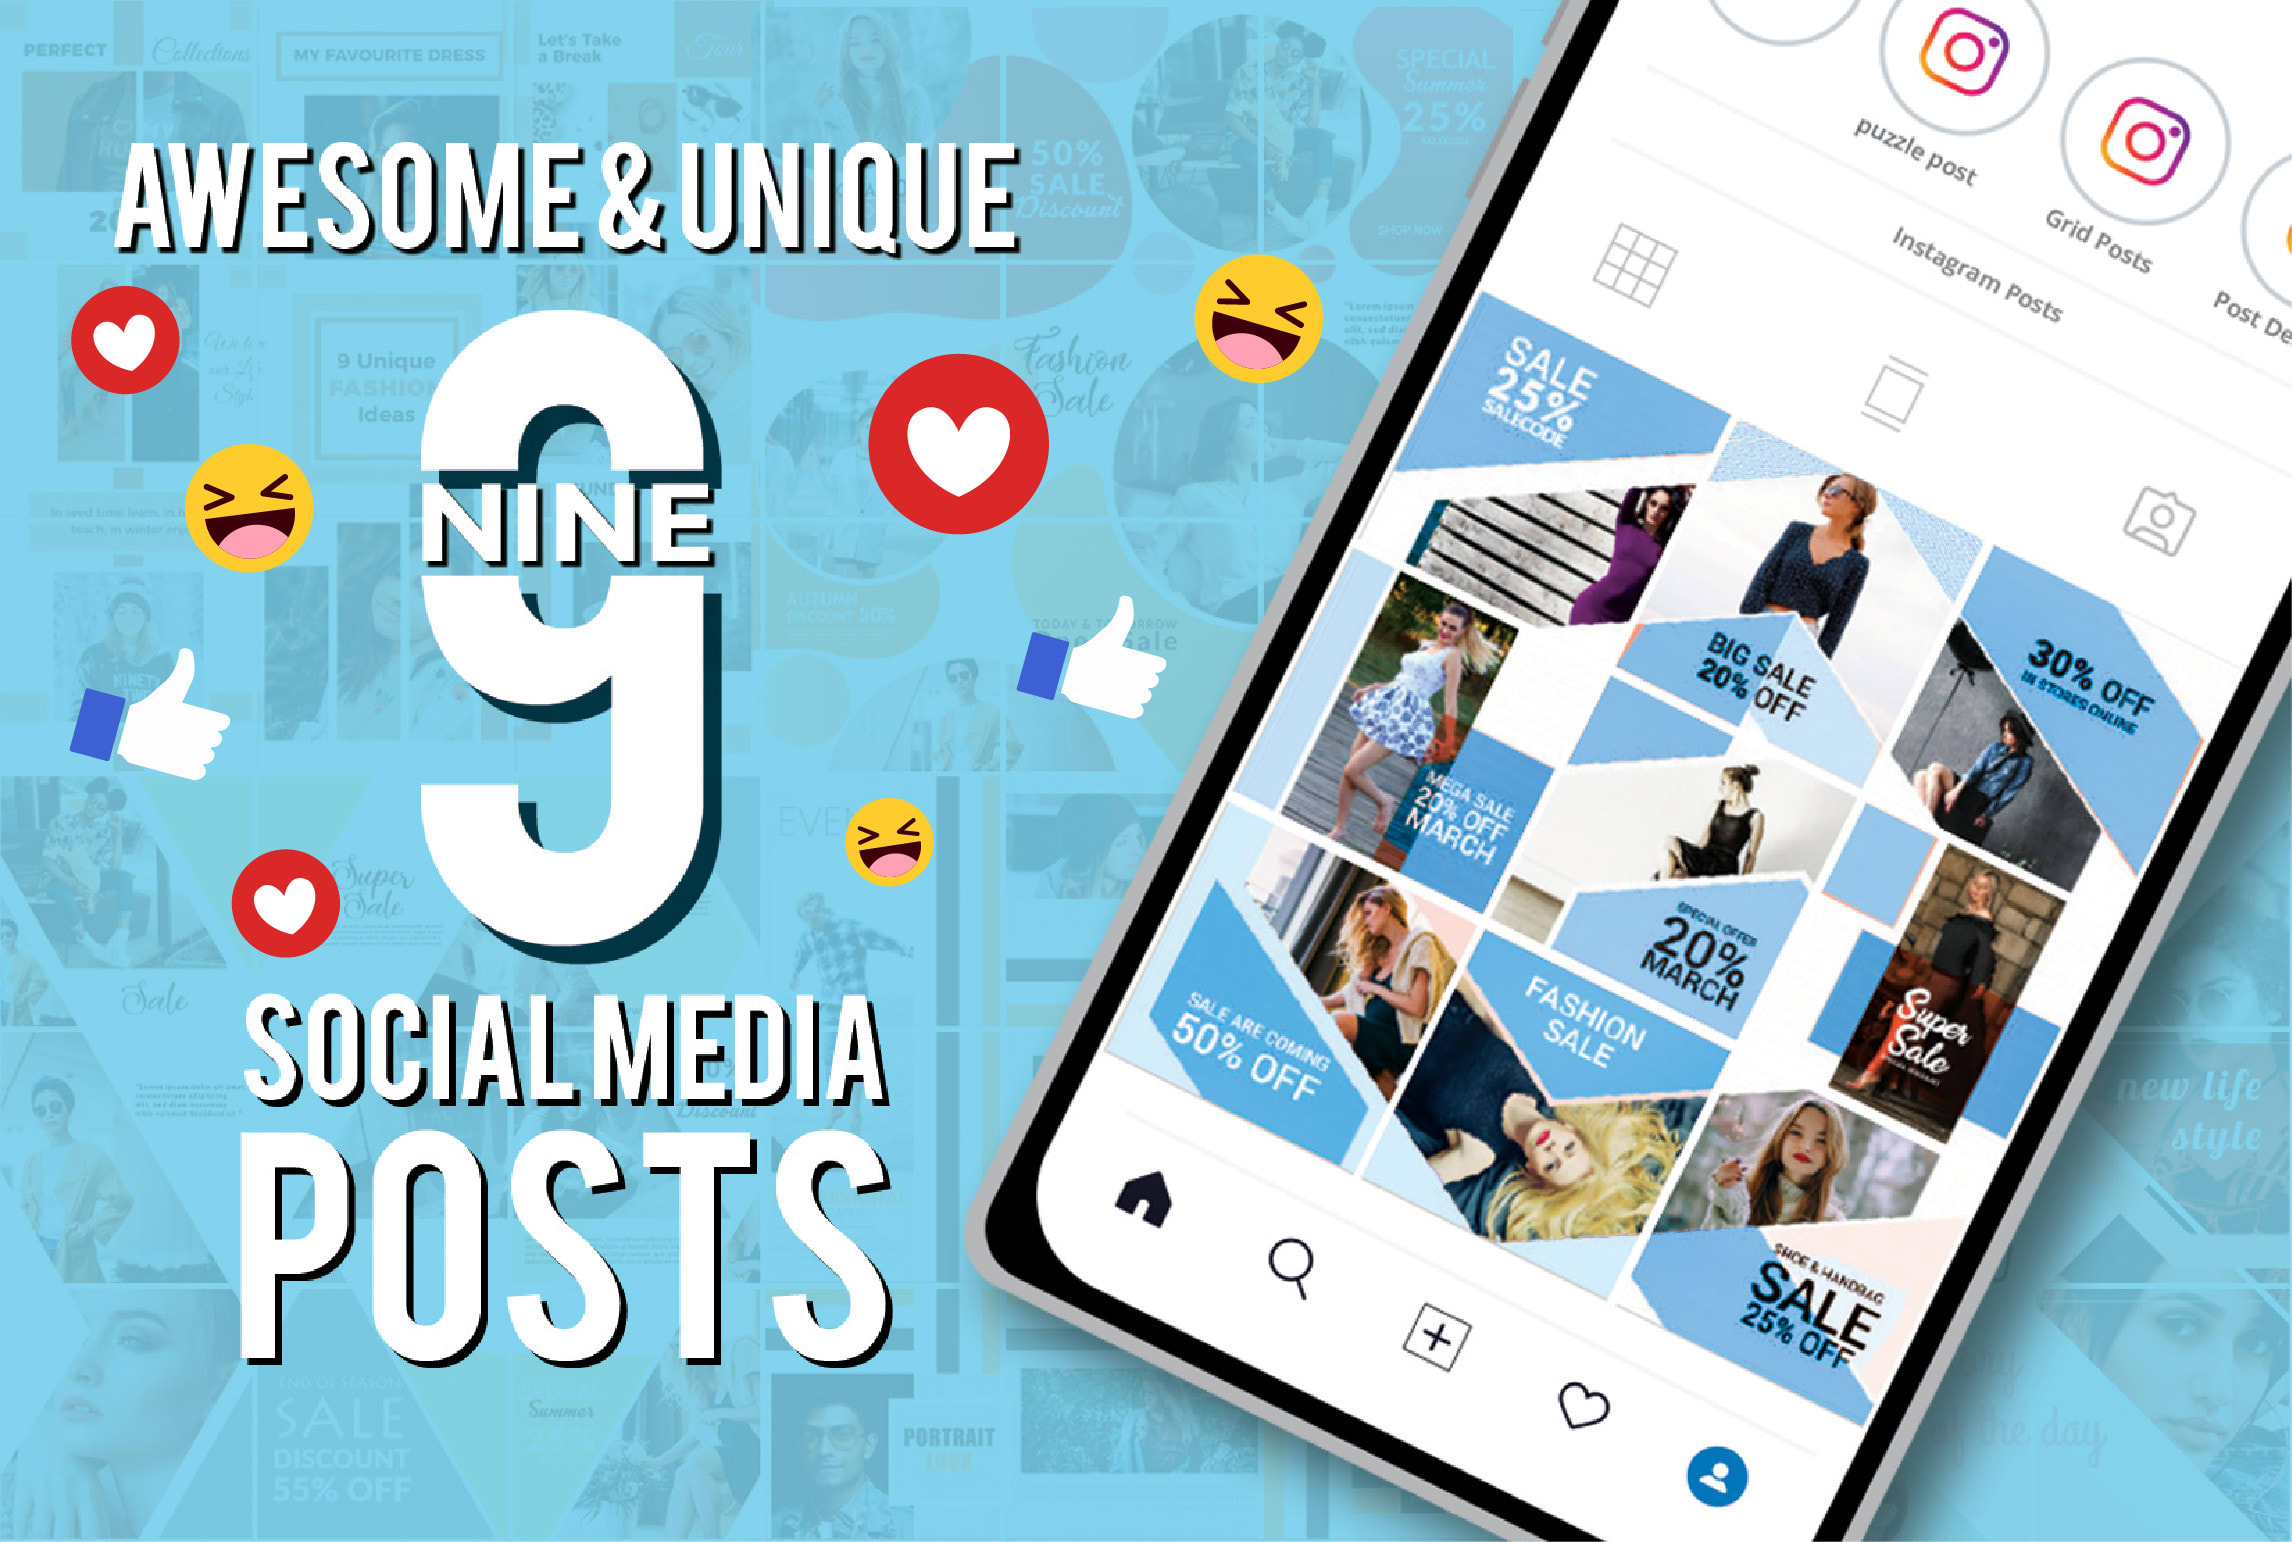 Instagram post layout ideas - osezz